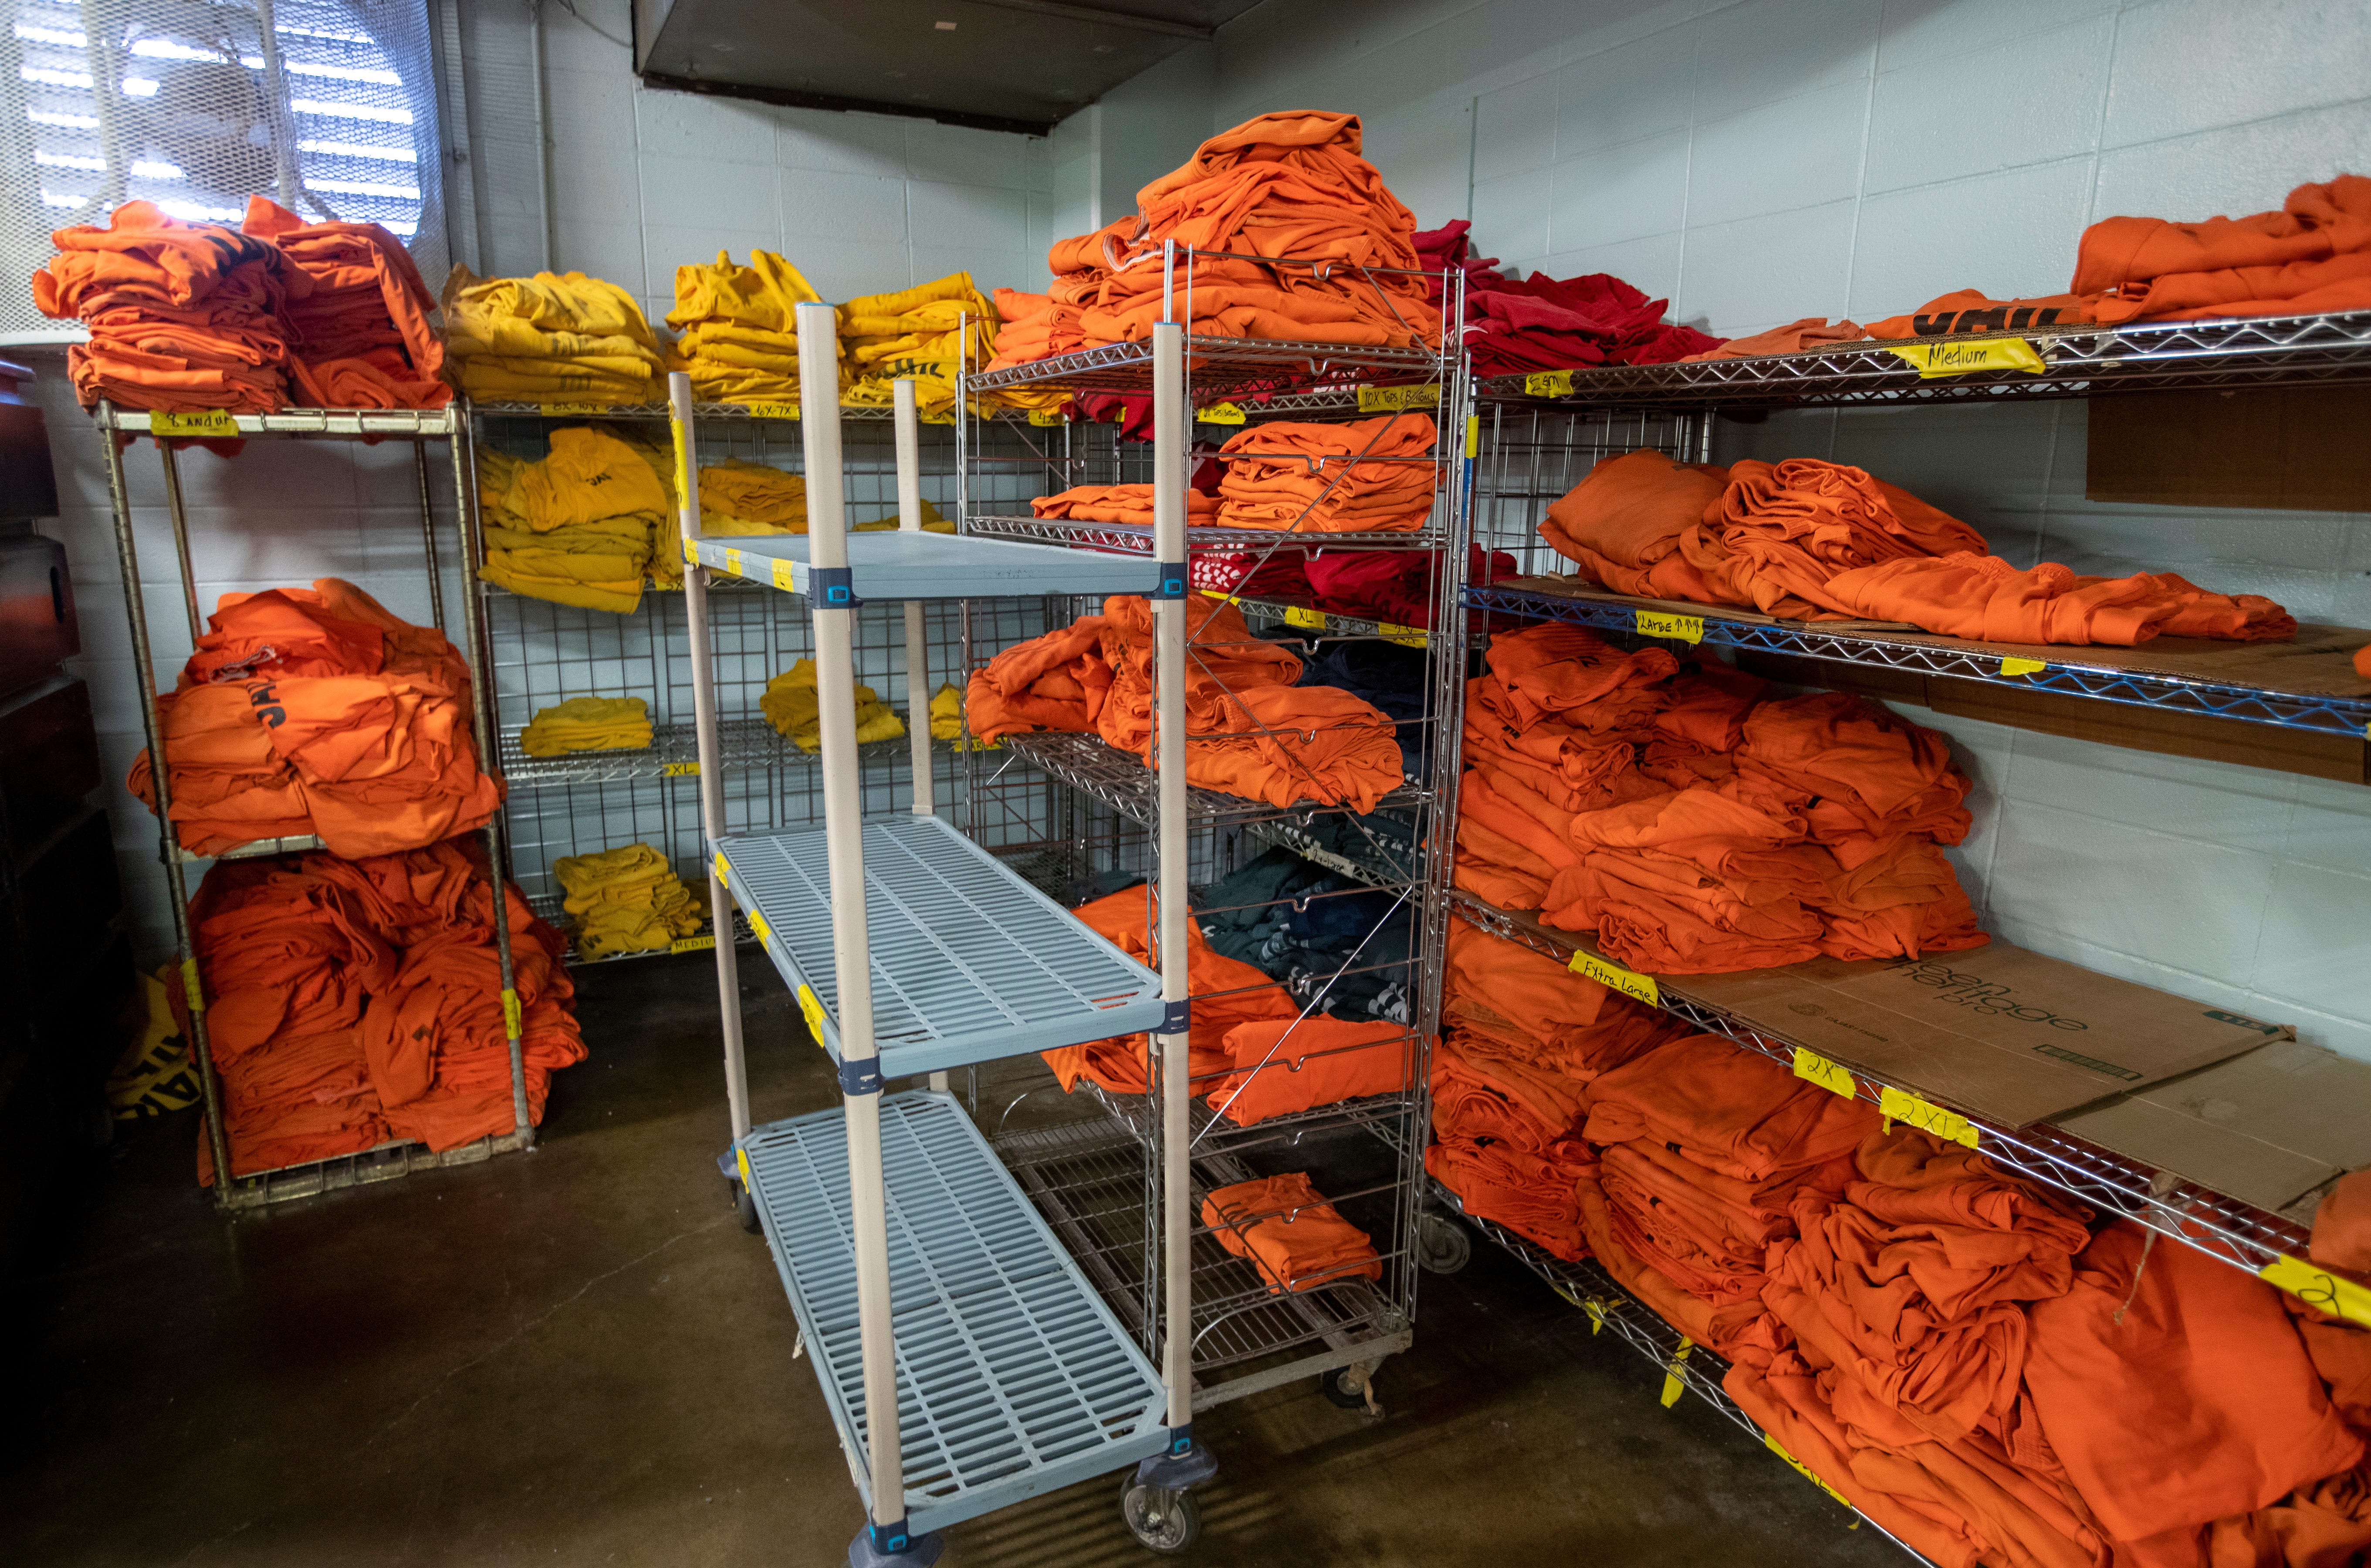 Orange clothing on racks on Thursday, July 15, 2021, at downtown Indianapolis' Marion County Jail 1. The facility, in its current configuration since 1985 is going to be replaced with a modern jail at the under-construction Community Justice Campus. Officials point to their aging facility as a reason for increased stress among inmates.